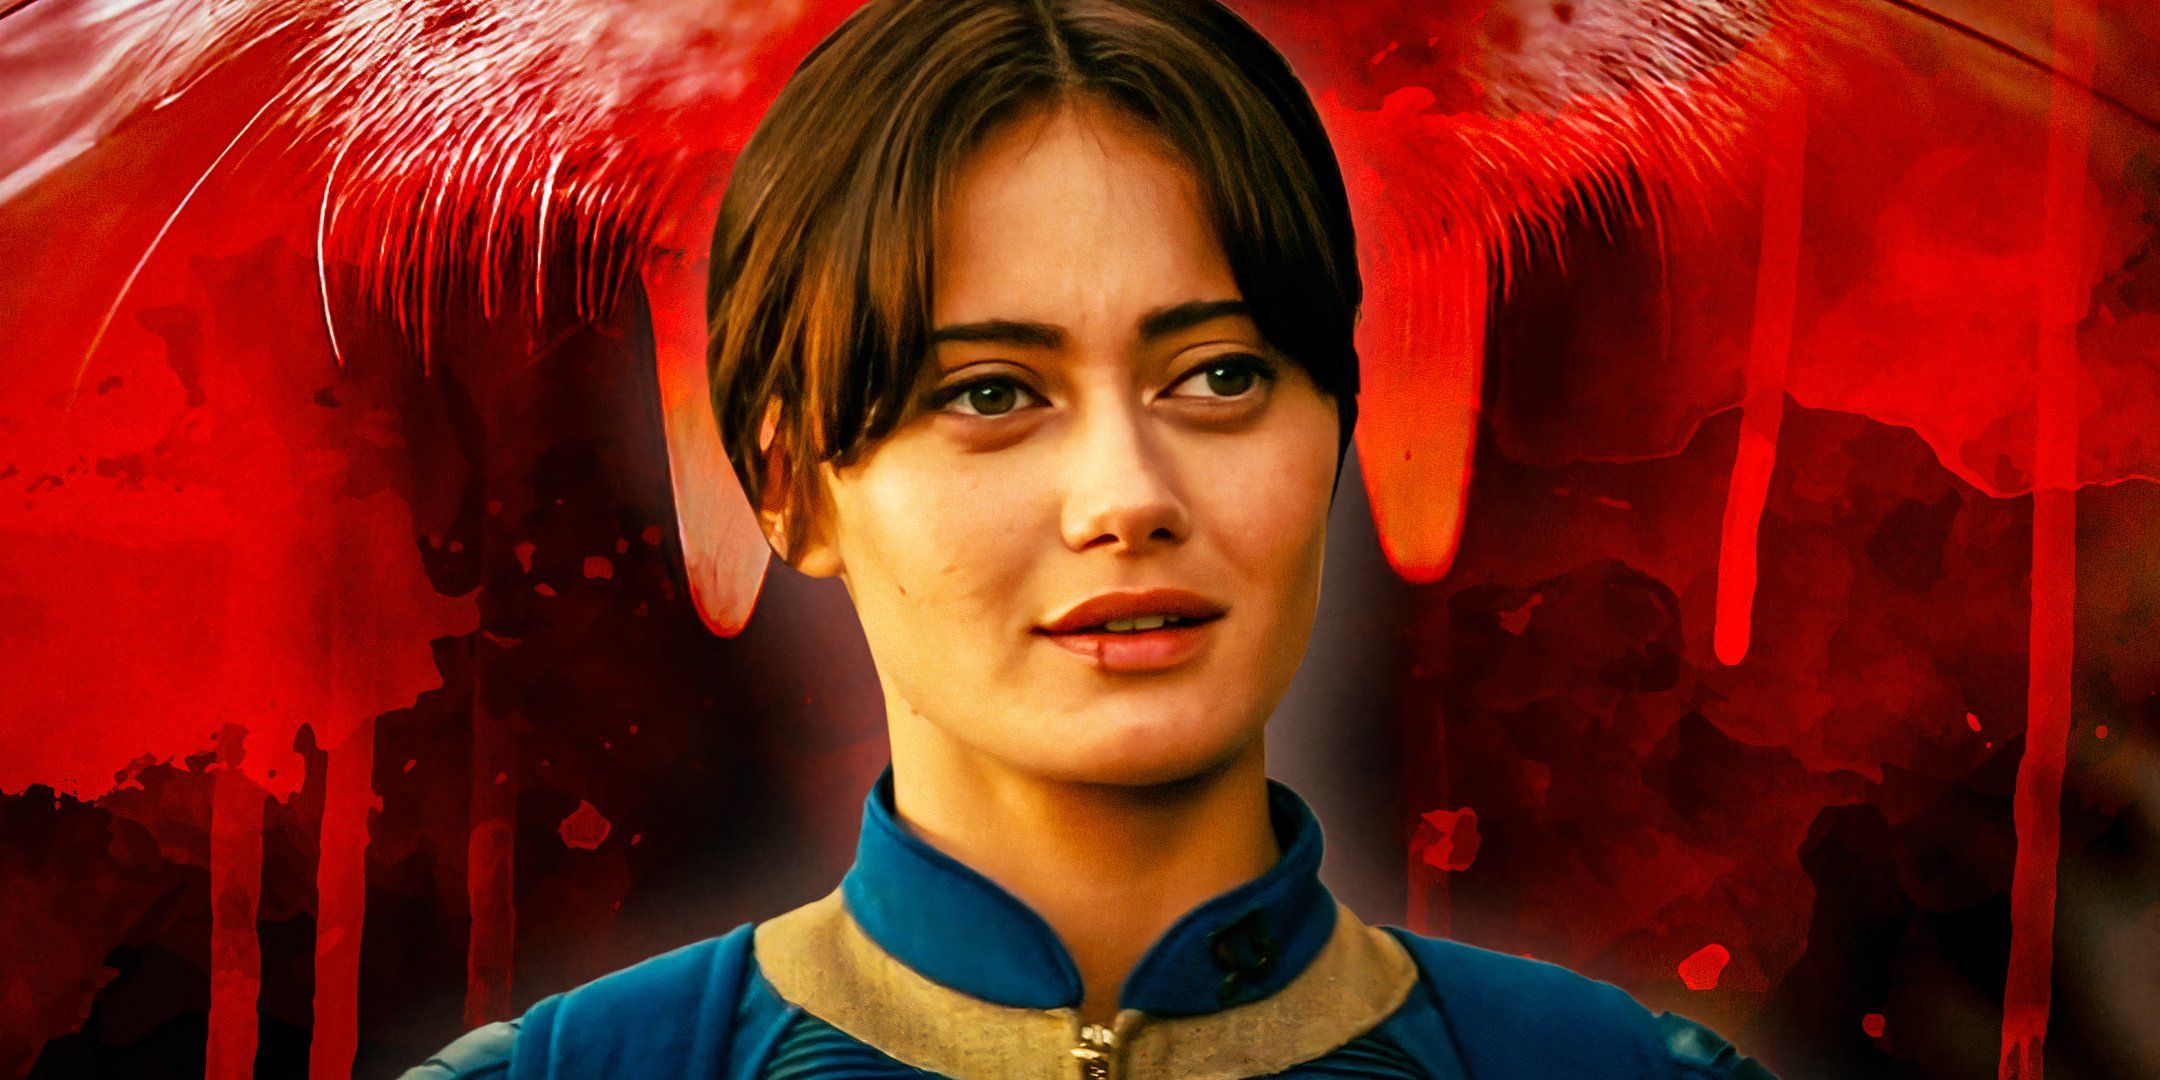 Ella Purnell as Lucy MacLean with blood in the background